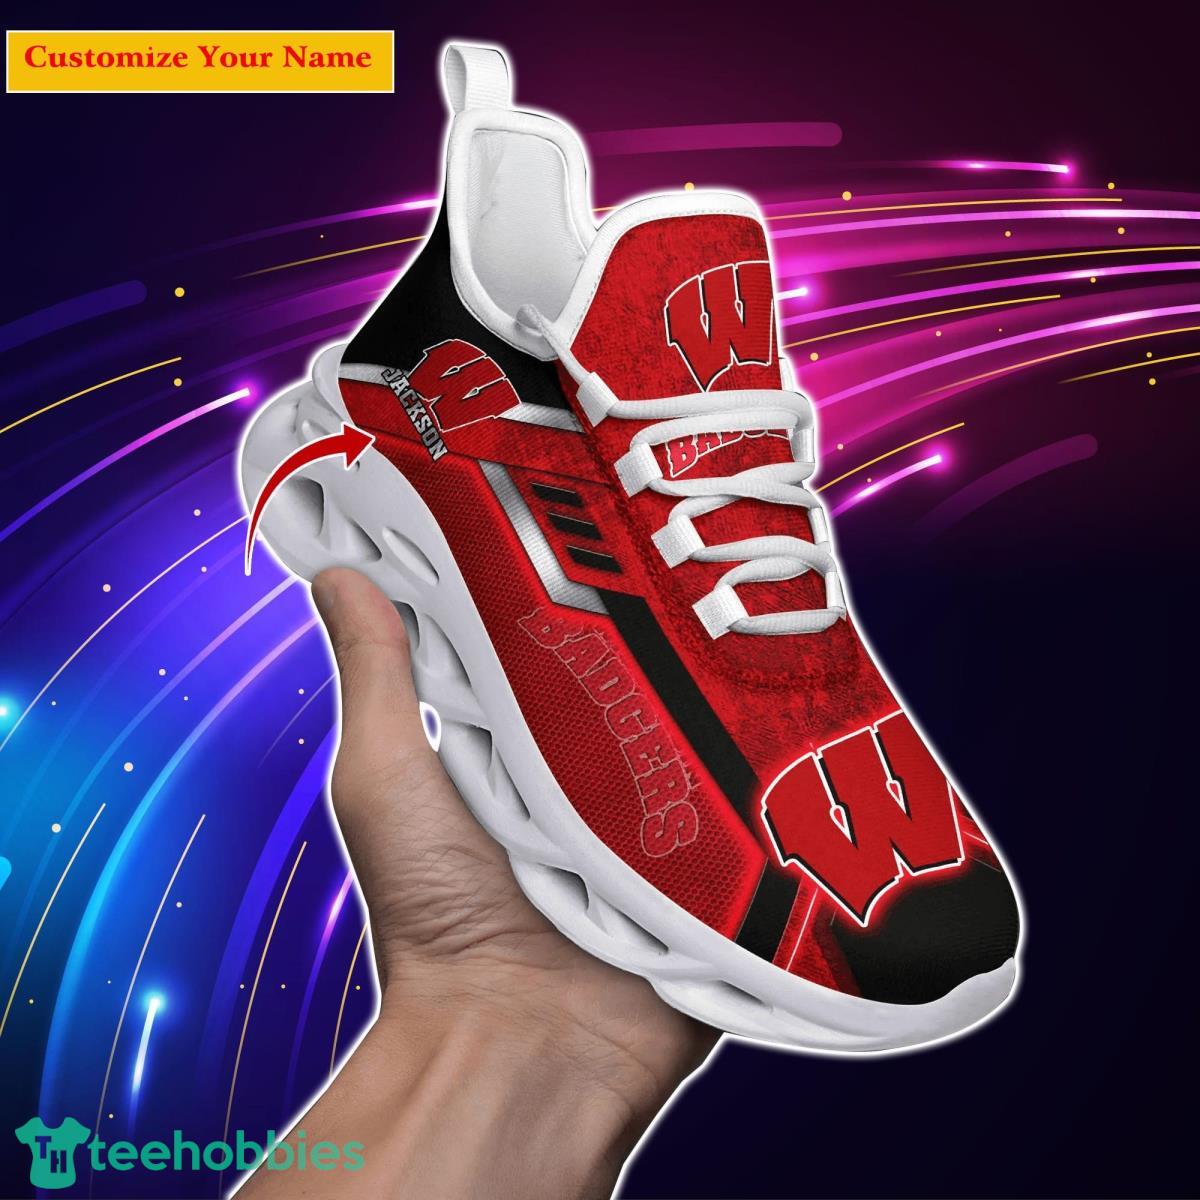 Wisconsin Badgers NCAA1 Custom Name Max Soul Shoes Impressive Gift For Men Women Fans Product Photo 1